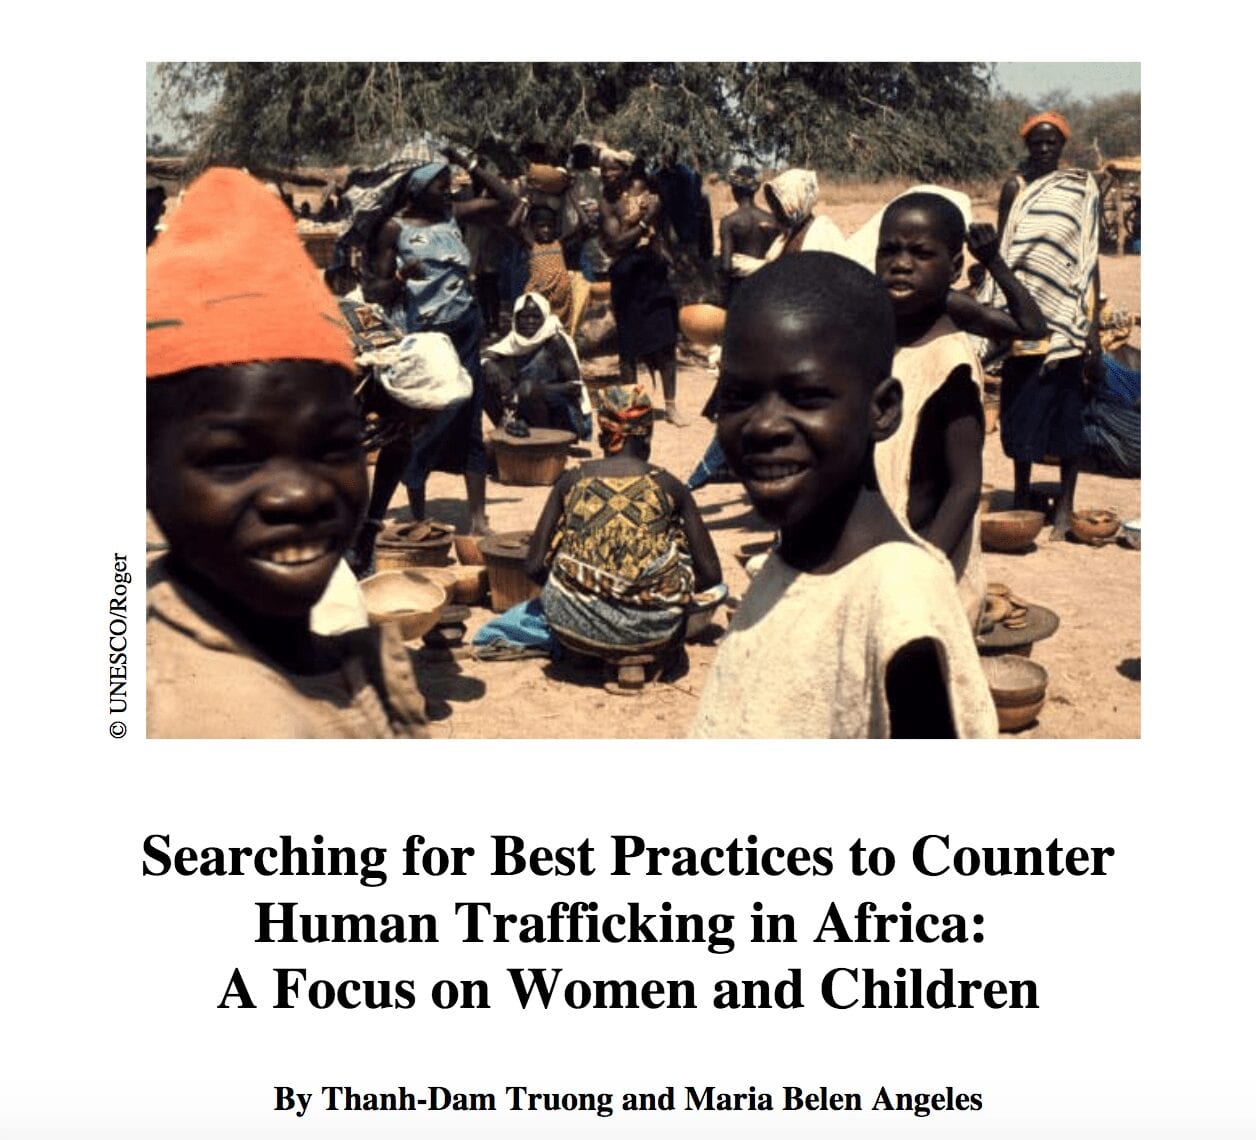 Searching for Best Practices to Counter Human Trafficking in Africa: A Focus on Women and Children